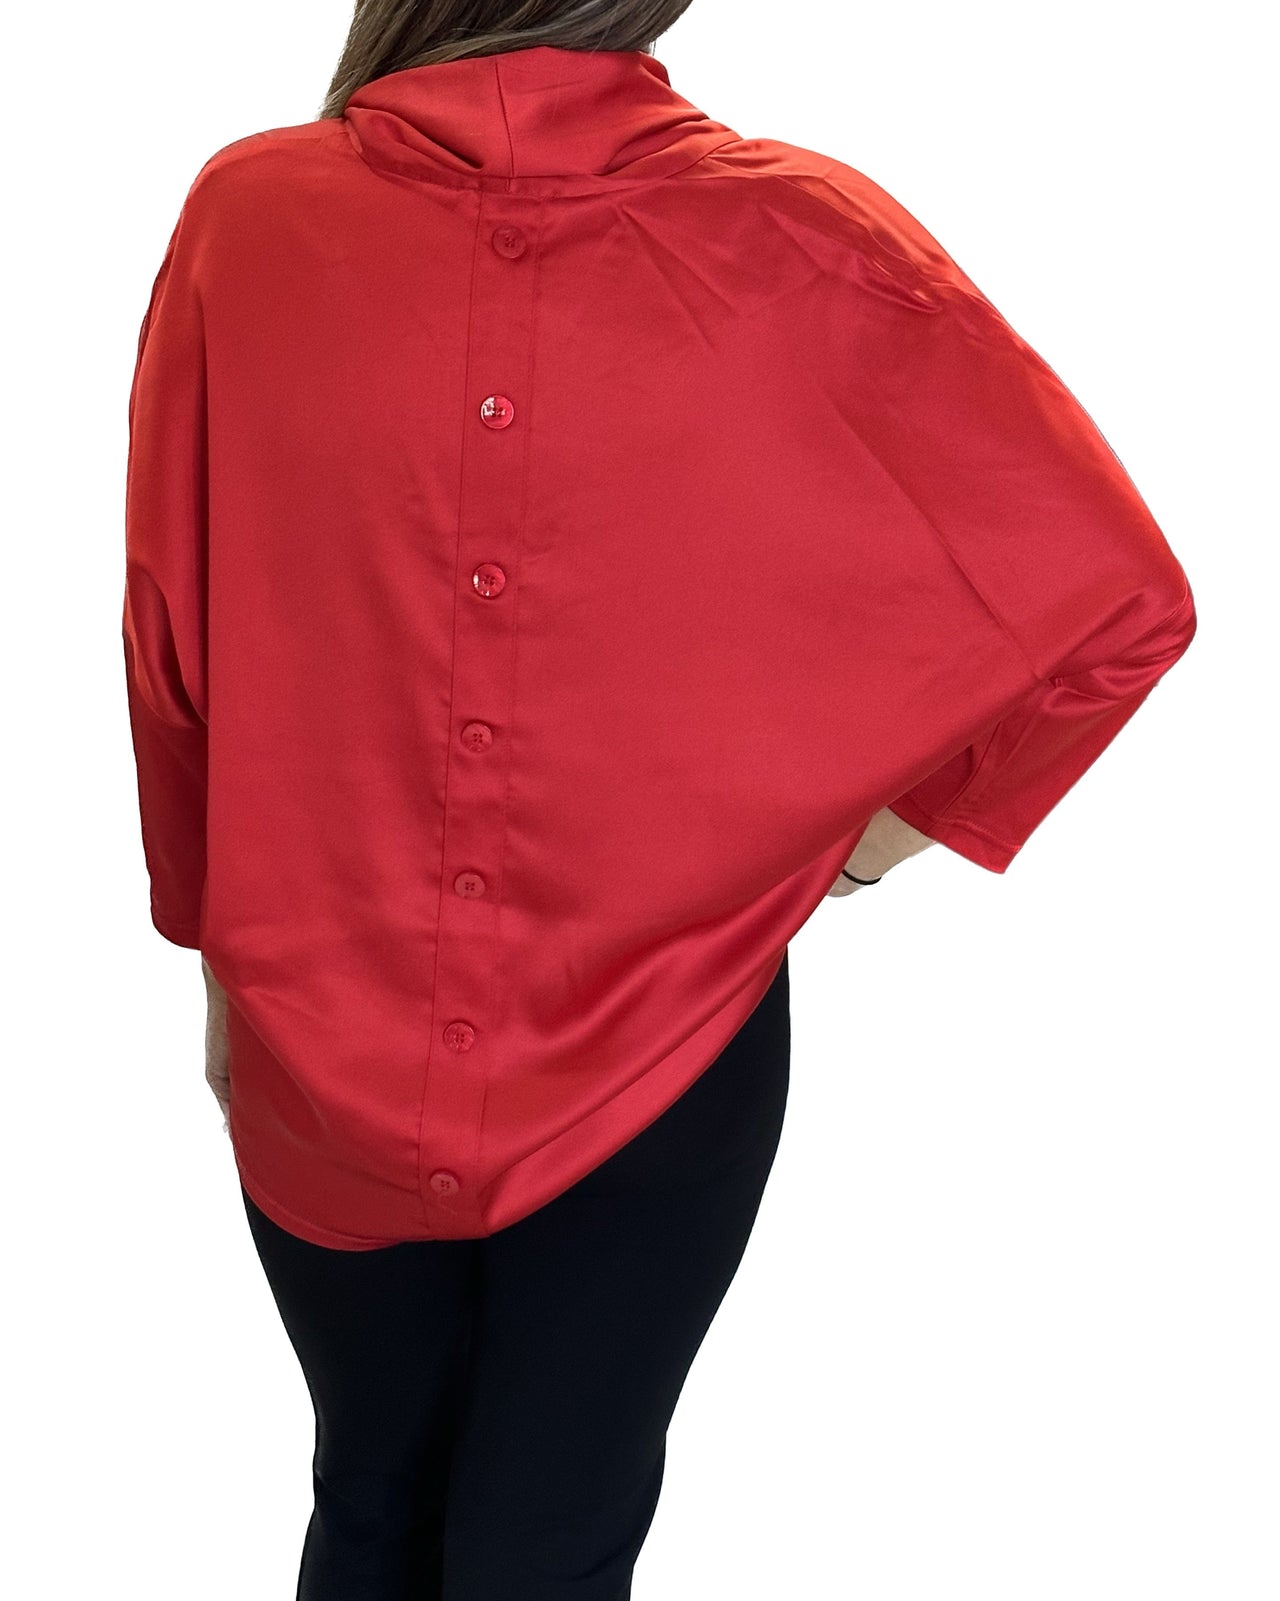 Satin Cowled Top in Red Boho Chic Elegant Top